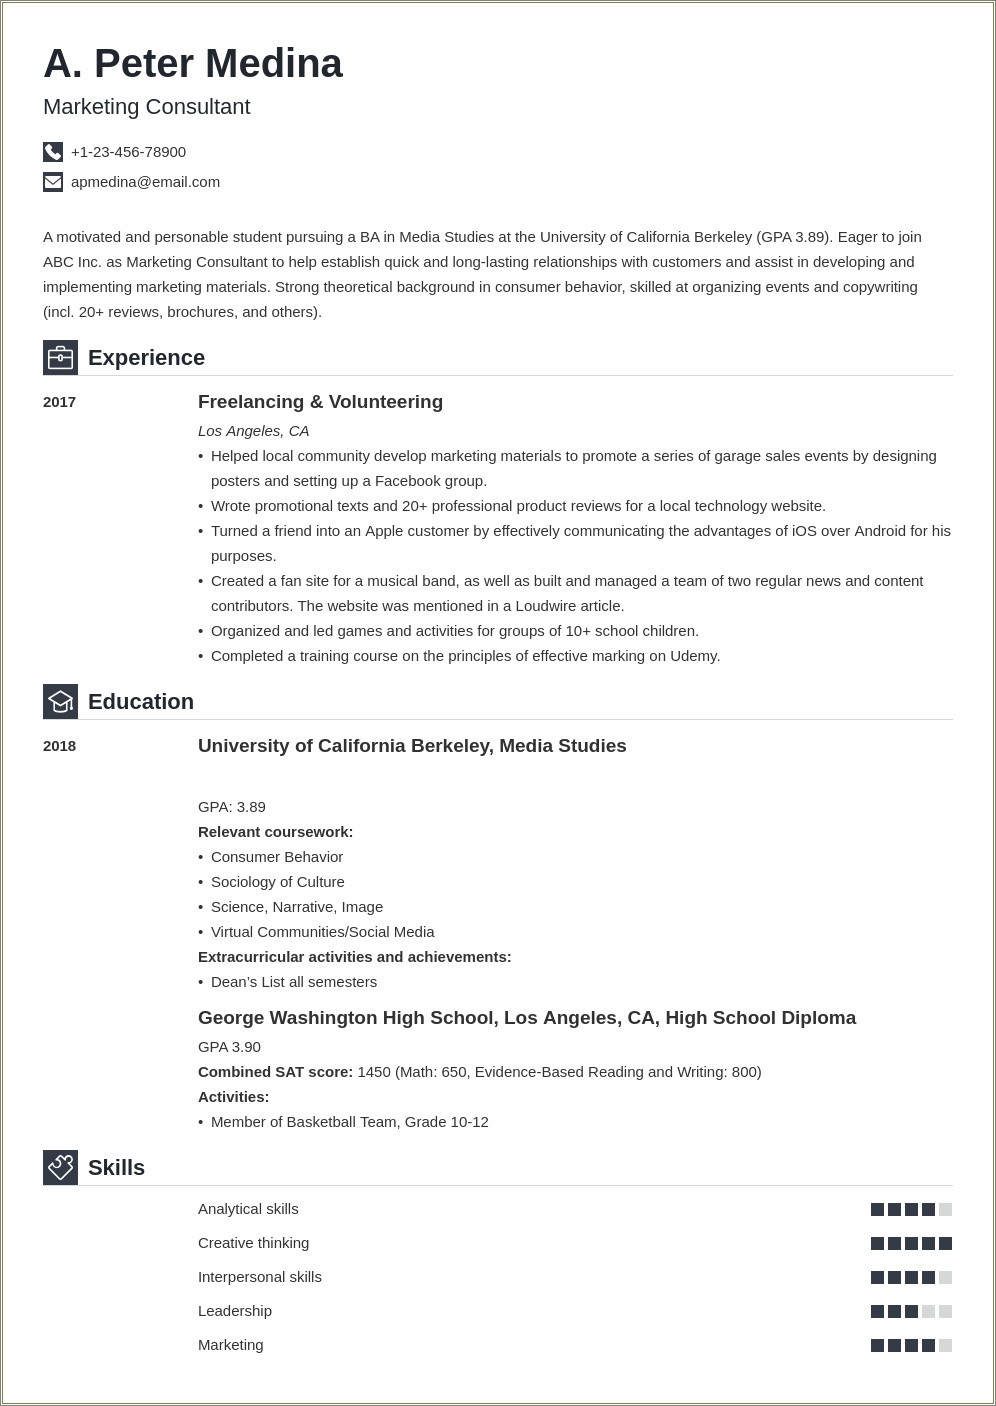 Resume Summary For Entry Level Engineer